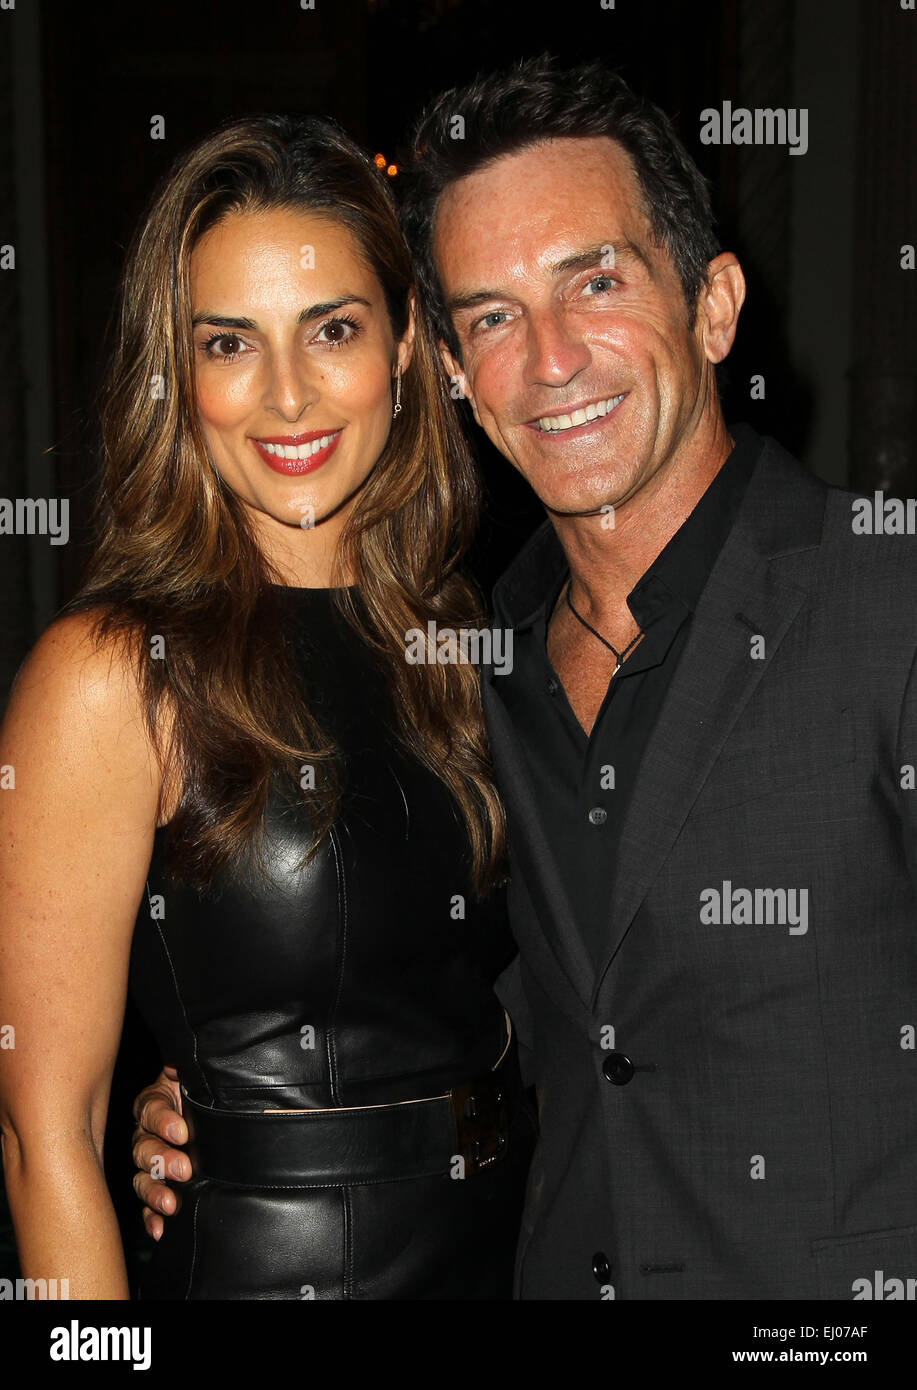 Face Forward Gala Supporting Victims Of Domestic Abuse Inside Featuring: Jeff Probst,Lisa Ann Russell Where: Los Angeles, California, United States When: 13 Sep 2014 Stock Photo